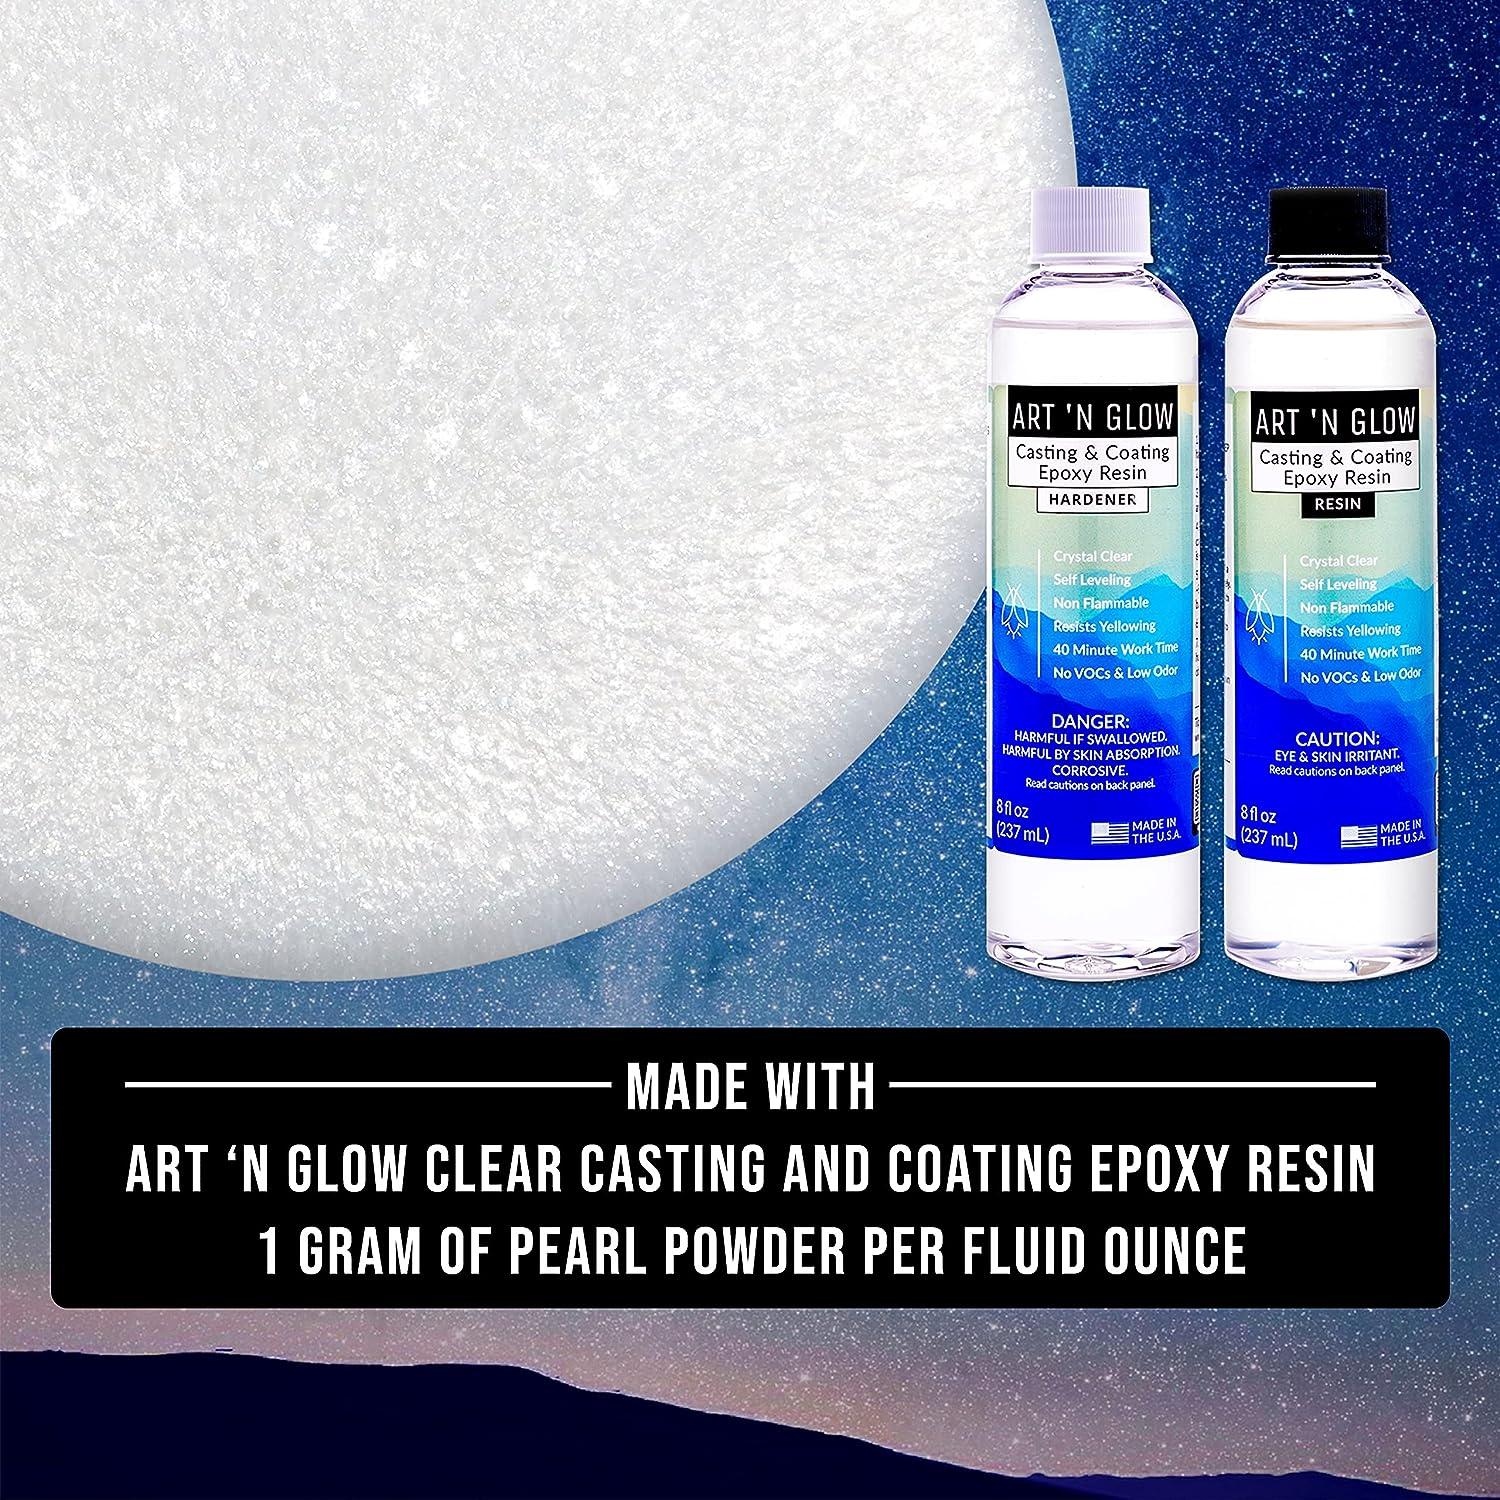 Clear Casting And Coating Epoxy Resin – Art 'N Glow